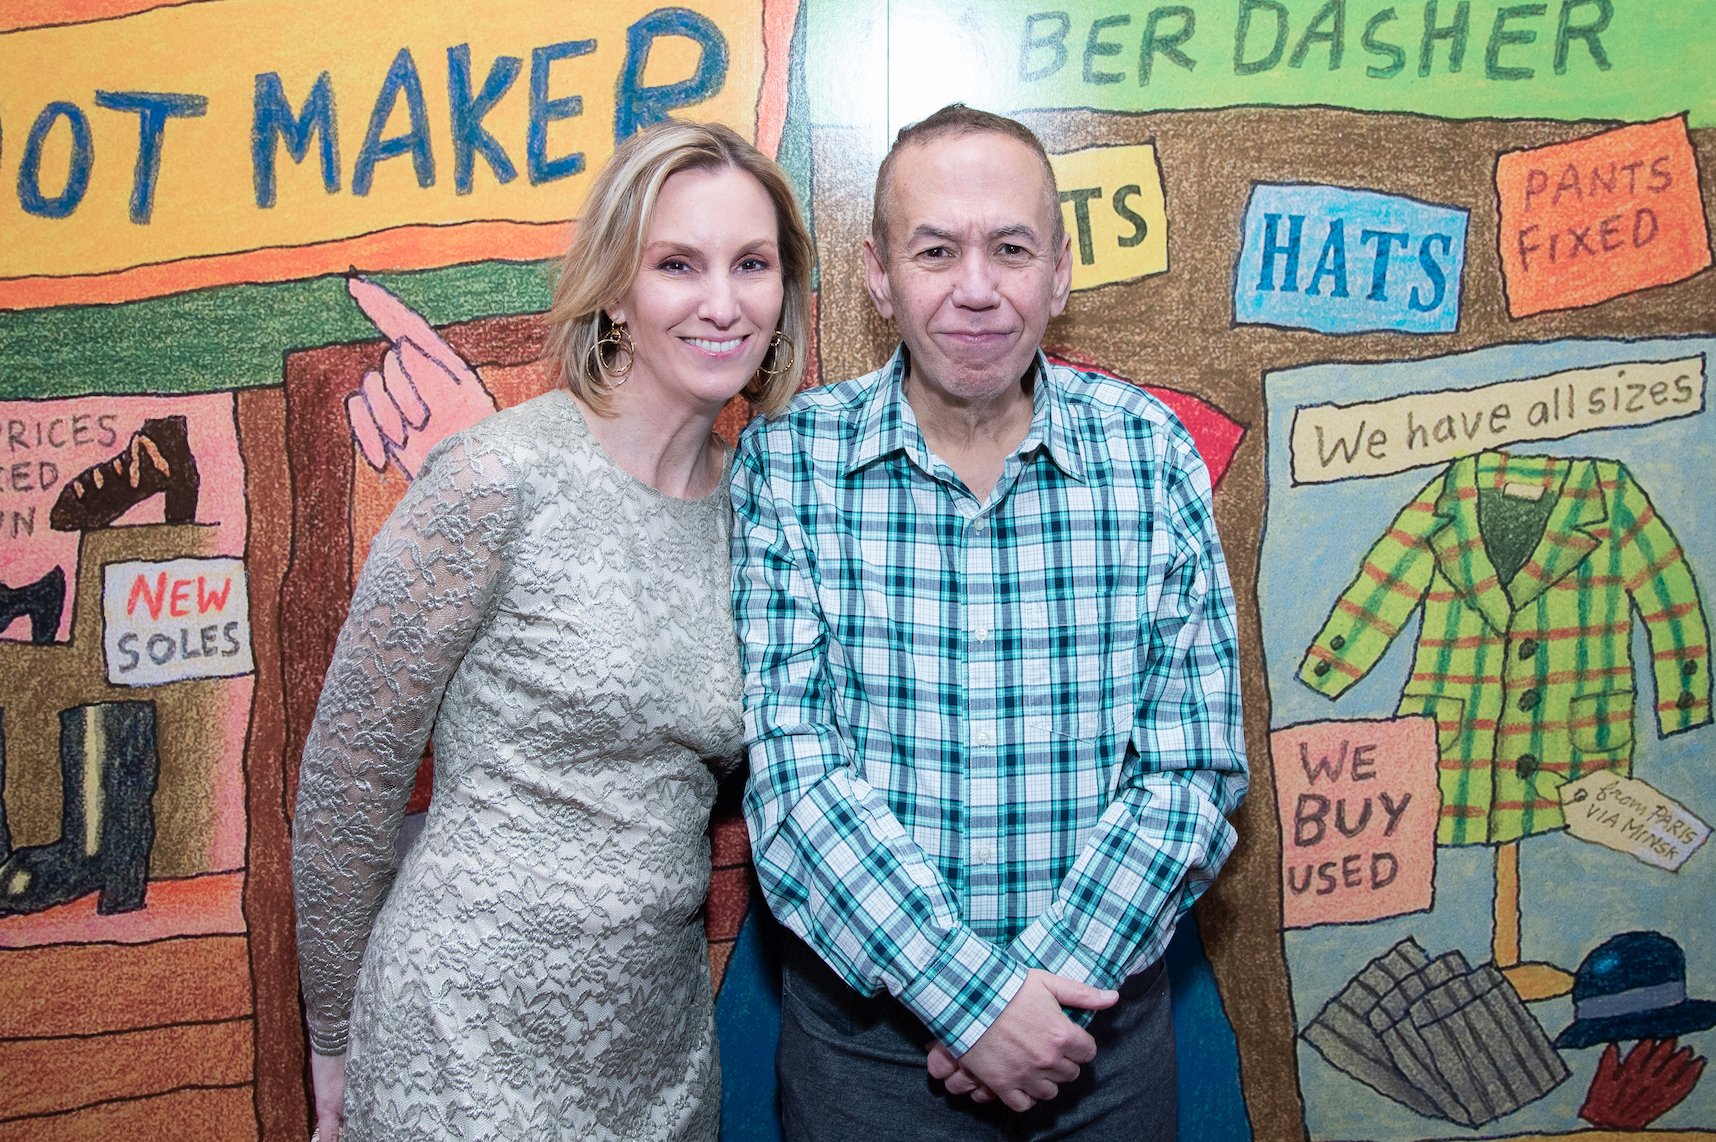 Gilbert Gottfried and his wife, Dara Kravitz, standing together and smiling